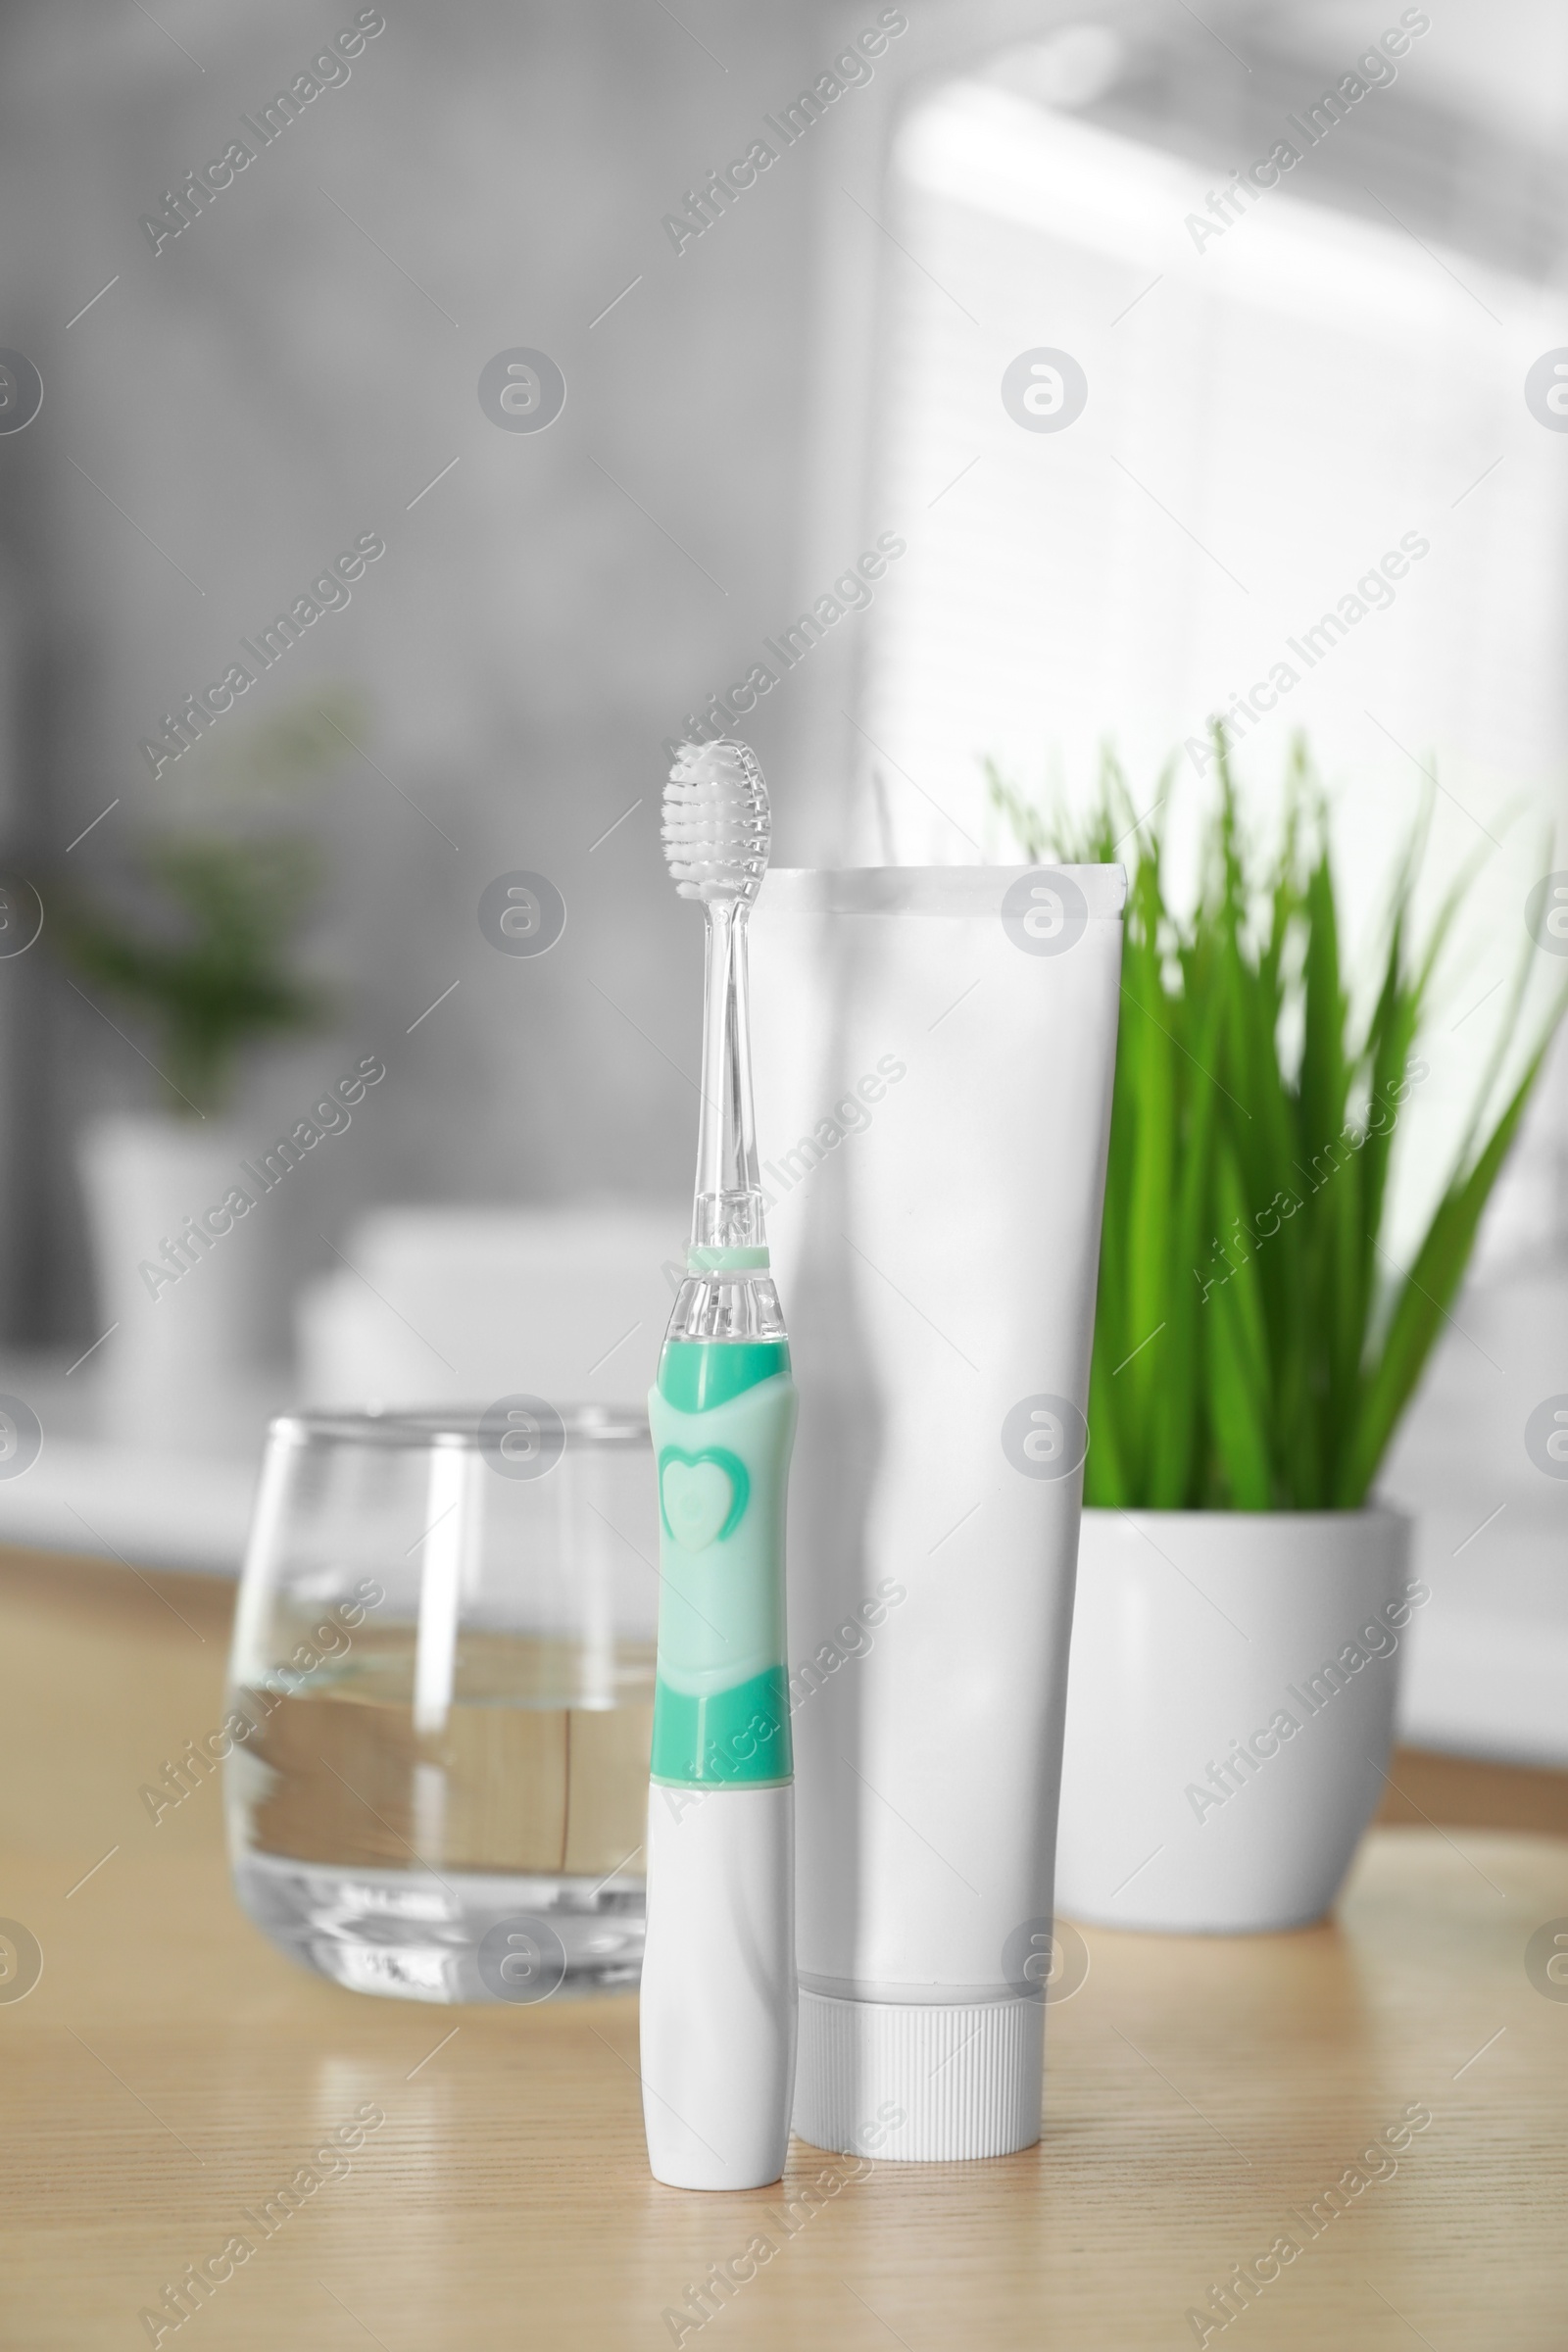 Photo of Electric toothbrush, tube with paste and glass of water on wooden table in bathroom